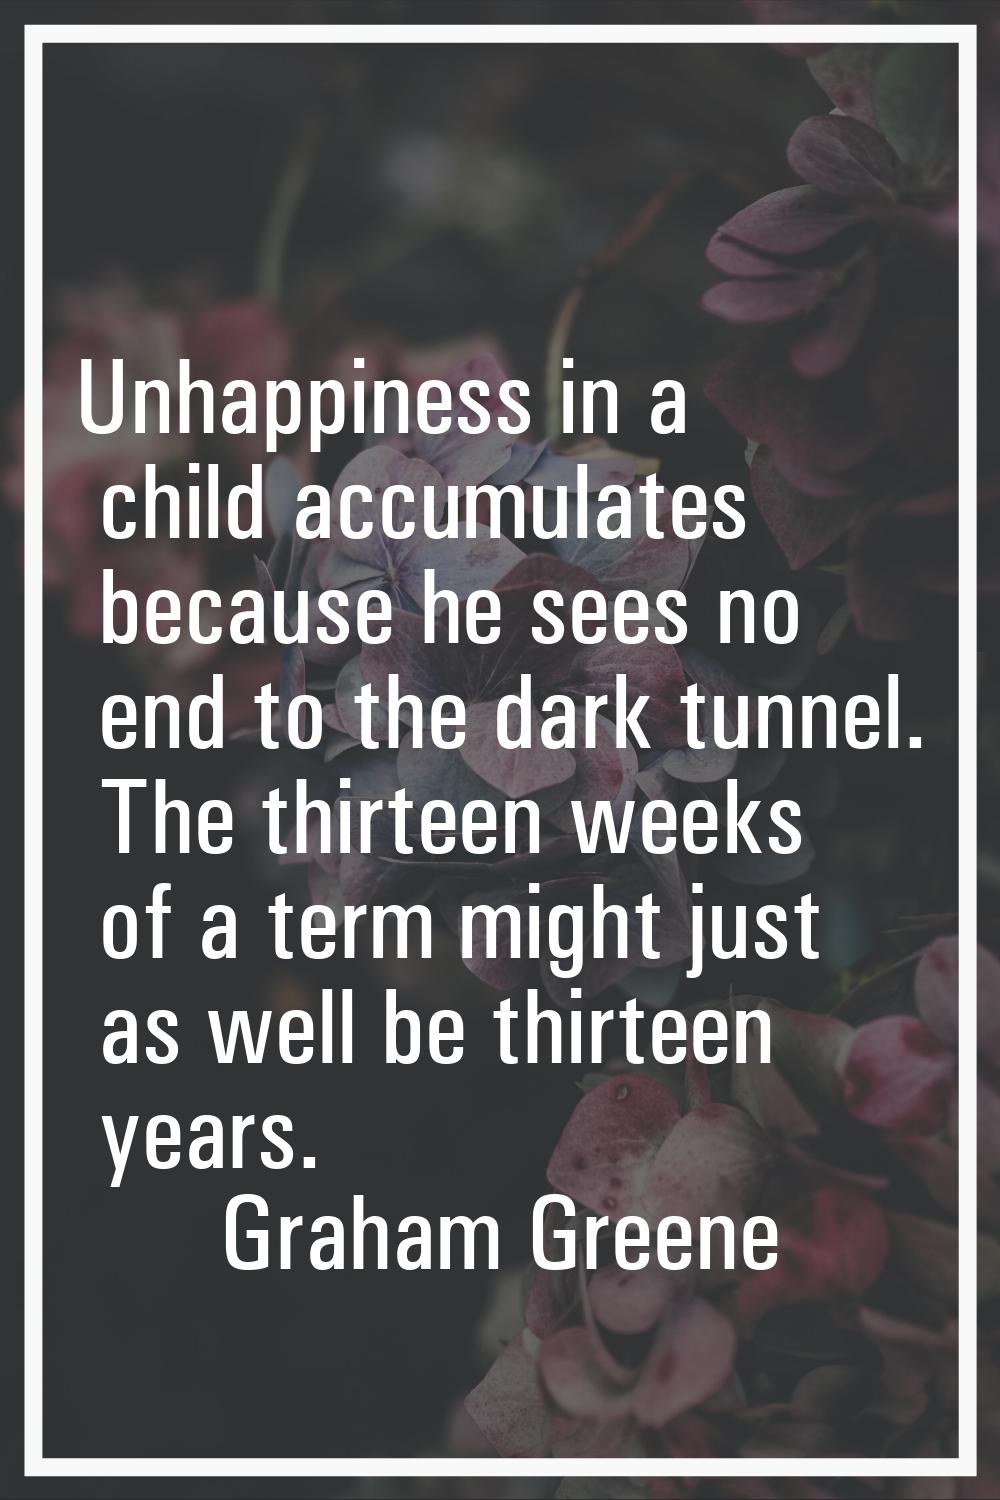 Unhappiness in a child accumulates because he sees no end to the dark tunnel. The thirteen weeks of